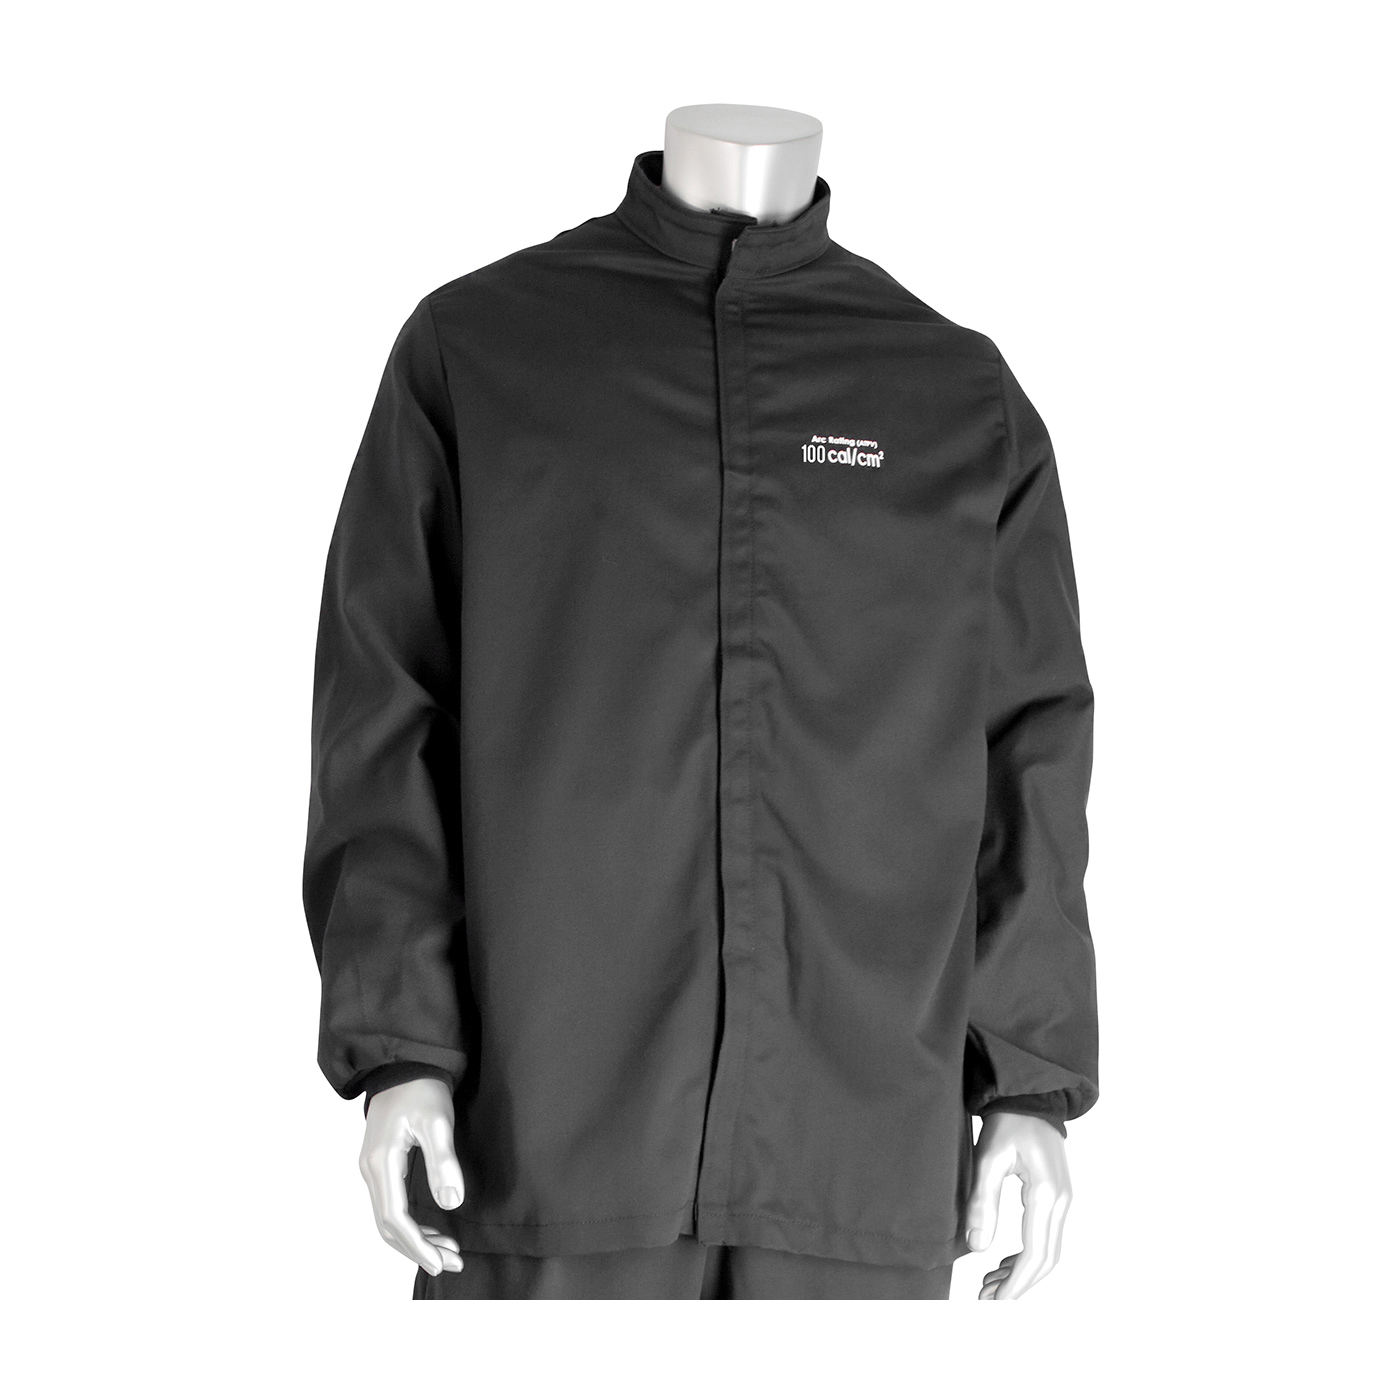 PIP® 9100-52750/L Arc and Flame Resistant Jacket, L, Gray, Aramid/Cotton, 44 to 46 in Chest, Resists: Arc and Flame, ASTM F1506-10a, ASTM F2178-12